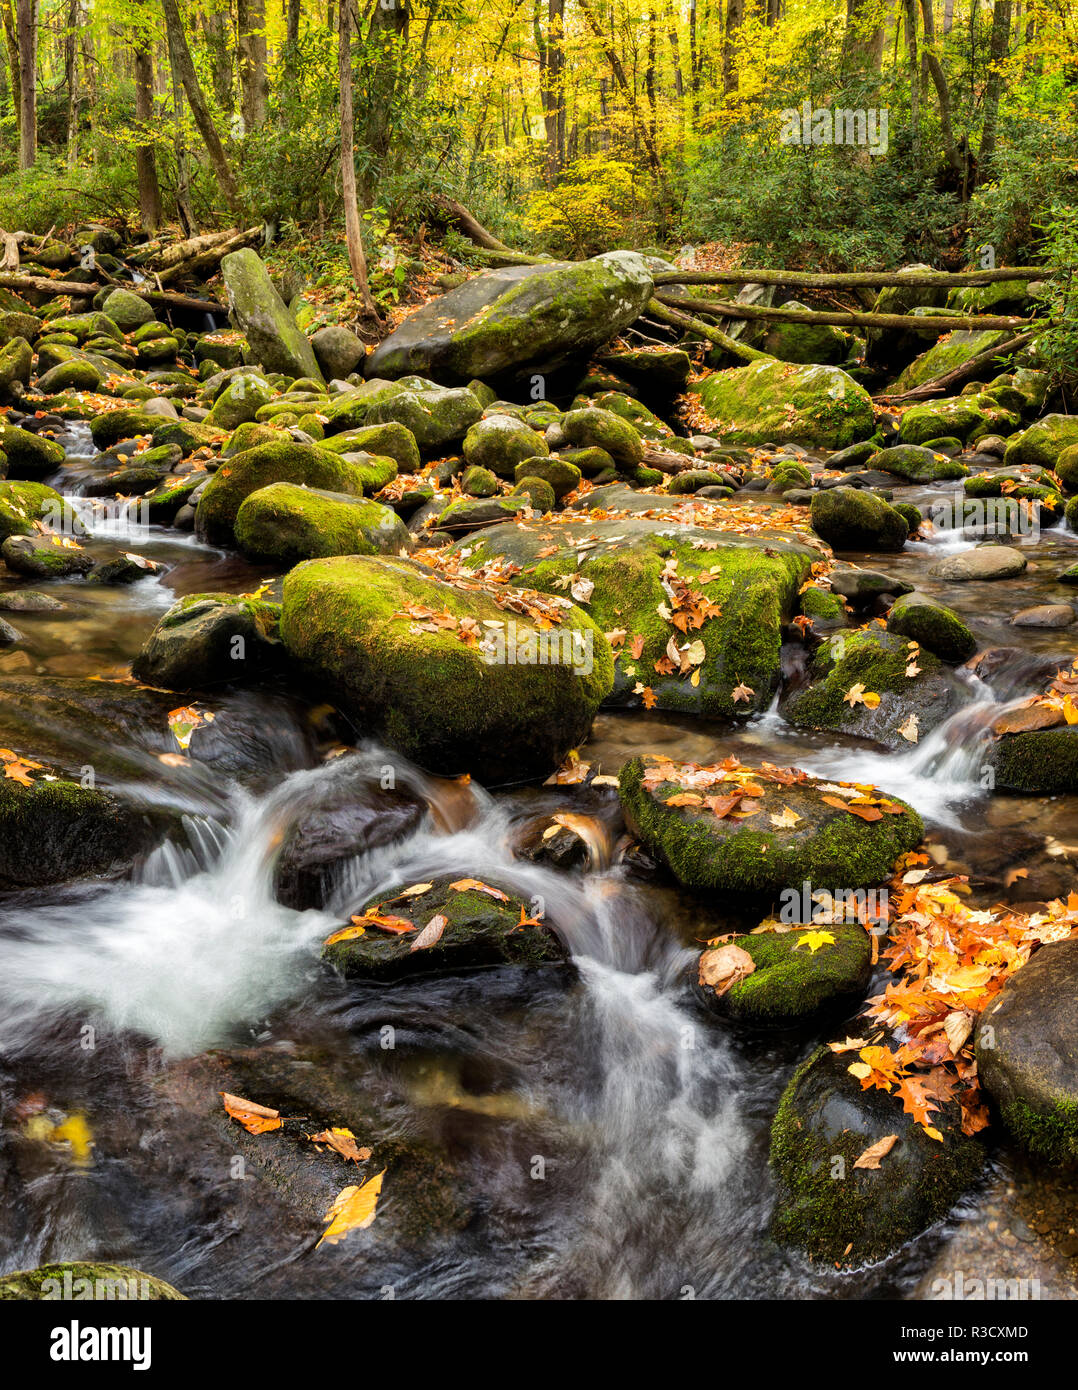 USA, Tennessee. Gatlinburg. Great Smoky Mountains National Park, Flowing creek along the Roaring Fork Motor Nature Trail Stock Photo